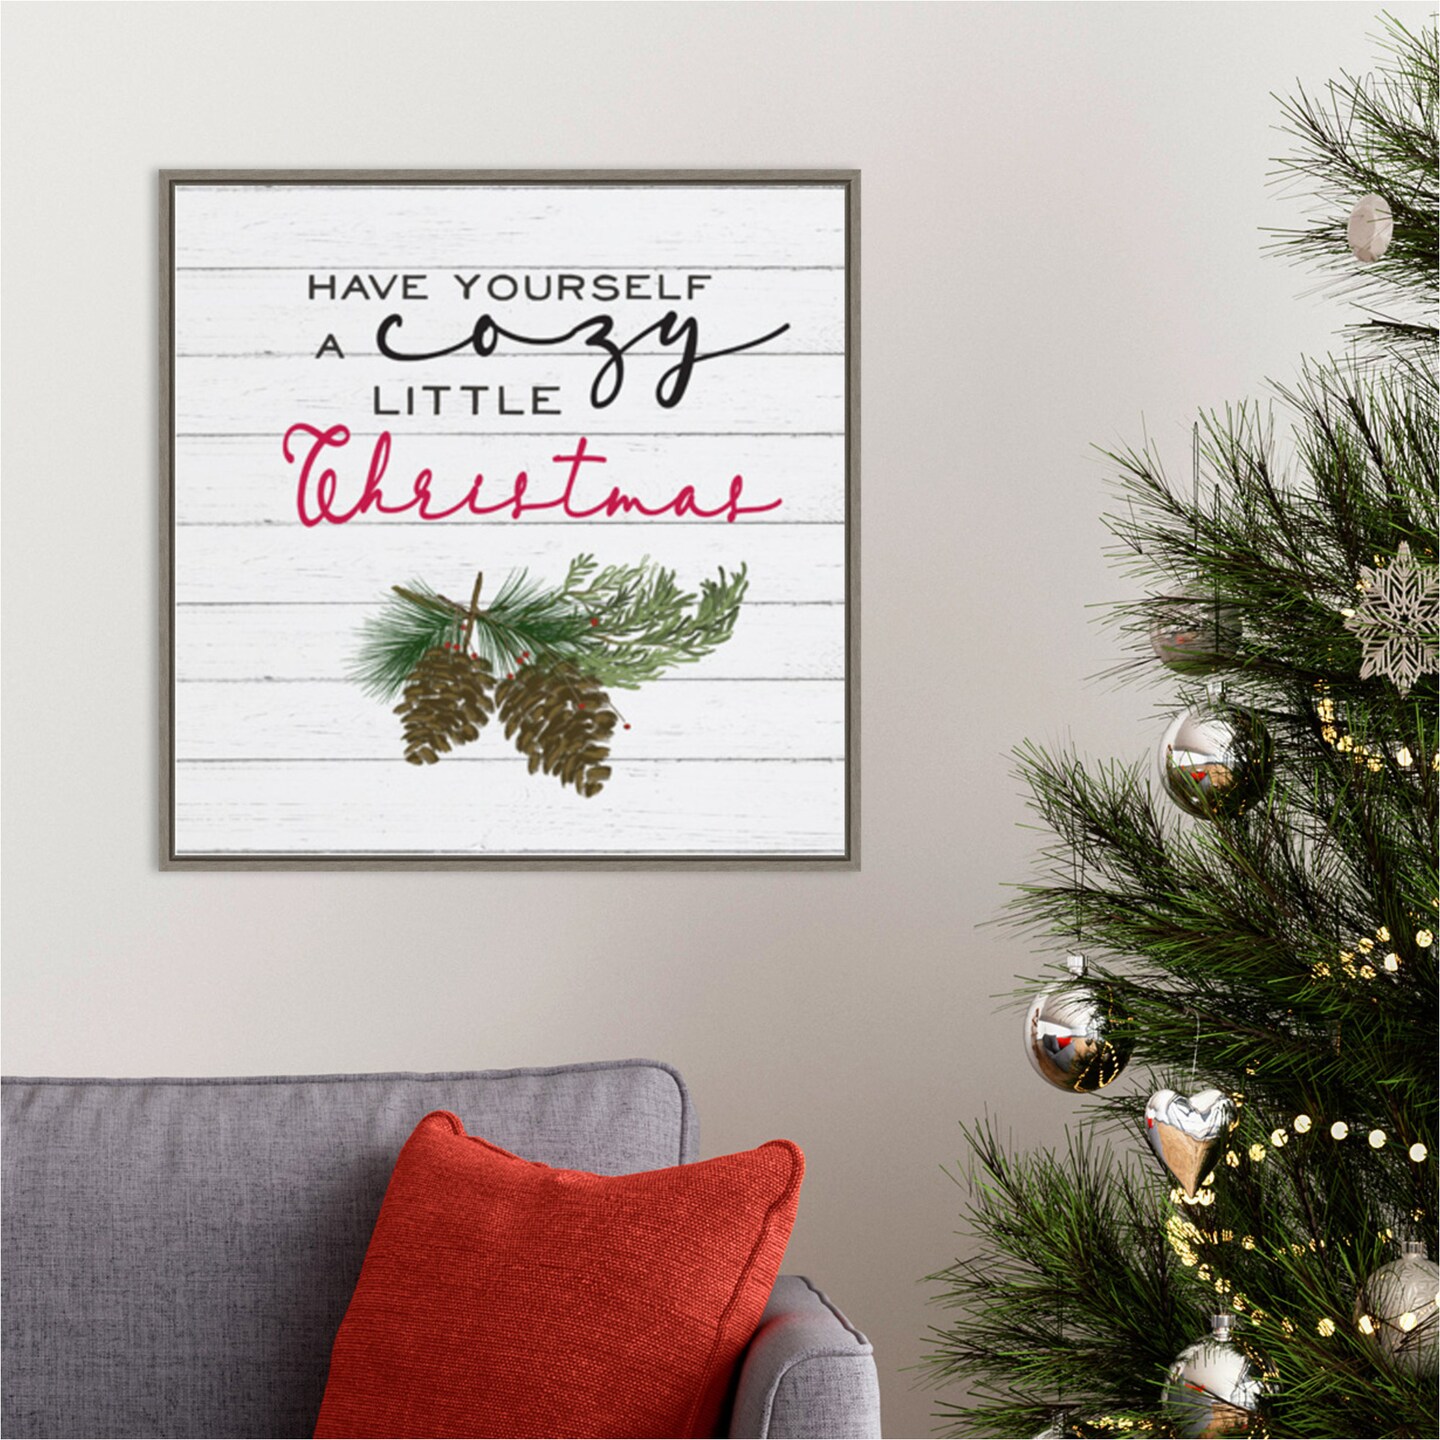 Cozy Christmas I-Pine cones by Hartworks Studio 22-in. W x 22-in. H. Canvas Wall Art Print Framed in Grey